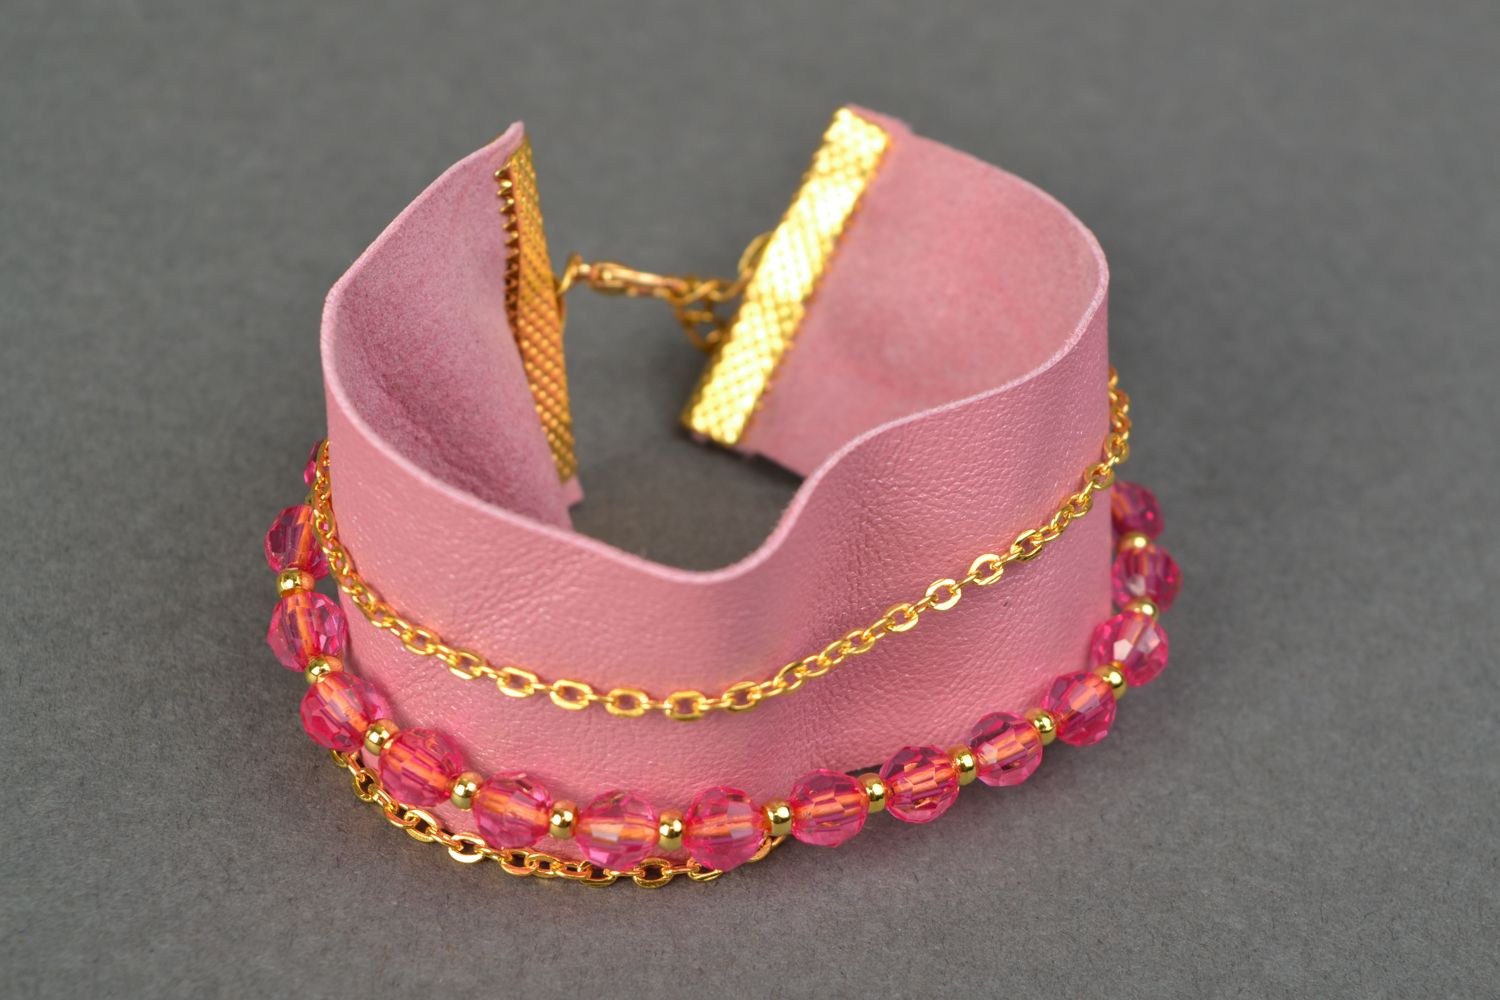 Pink genuine leather bracelet with chains and beads photo 1